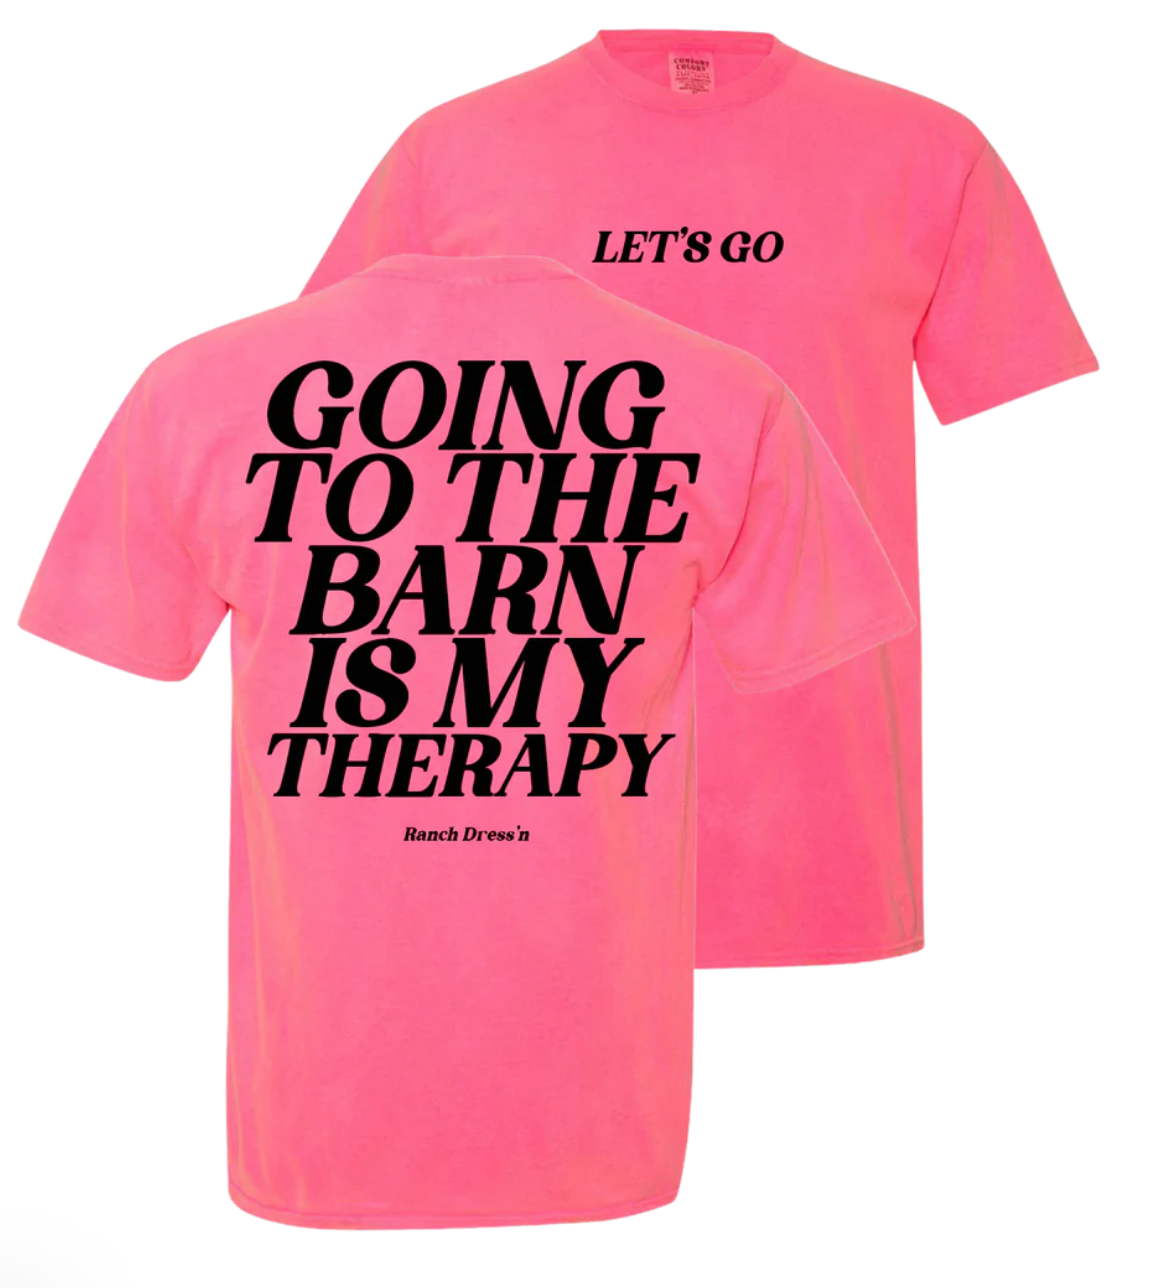 Ranch Dress'n Barn Therapy - Neon Pink